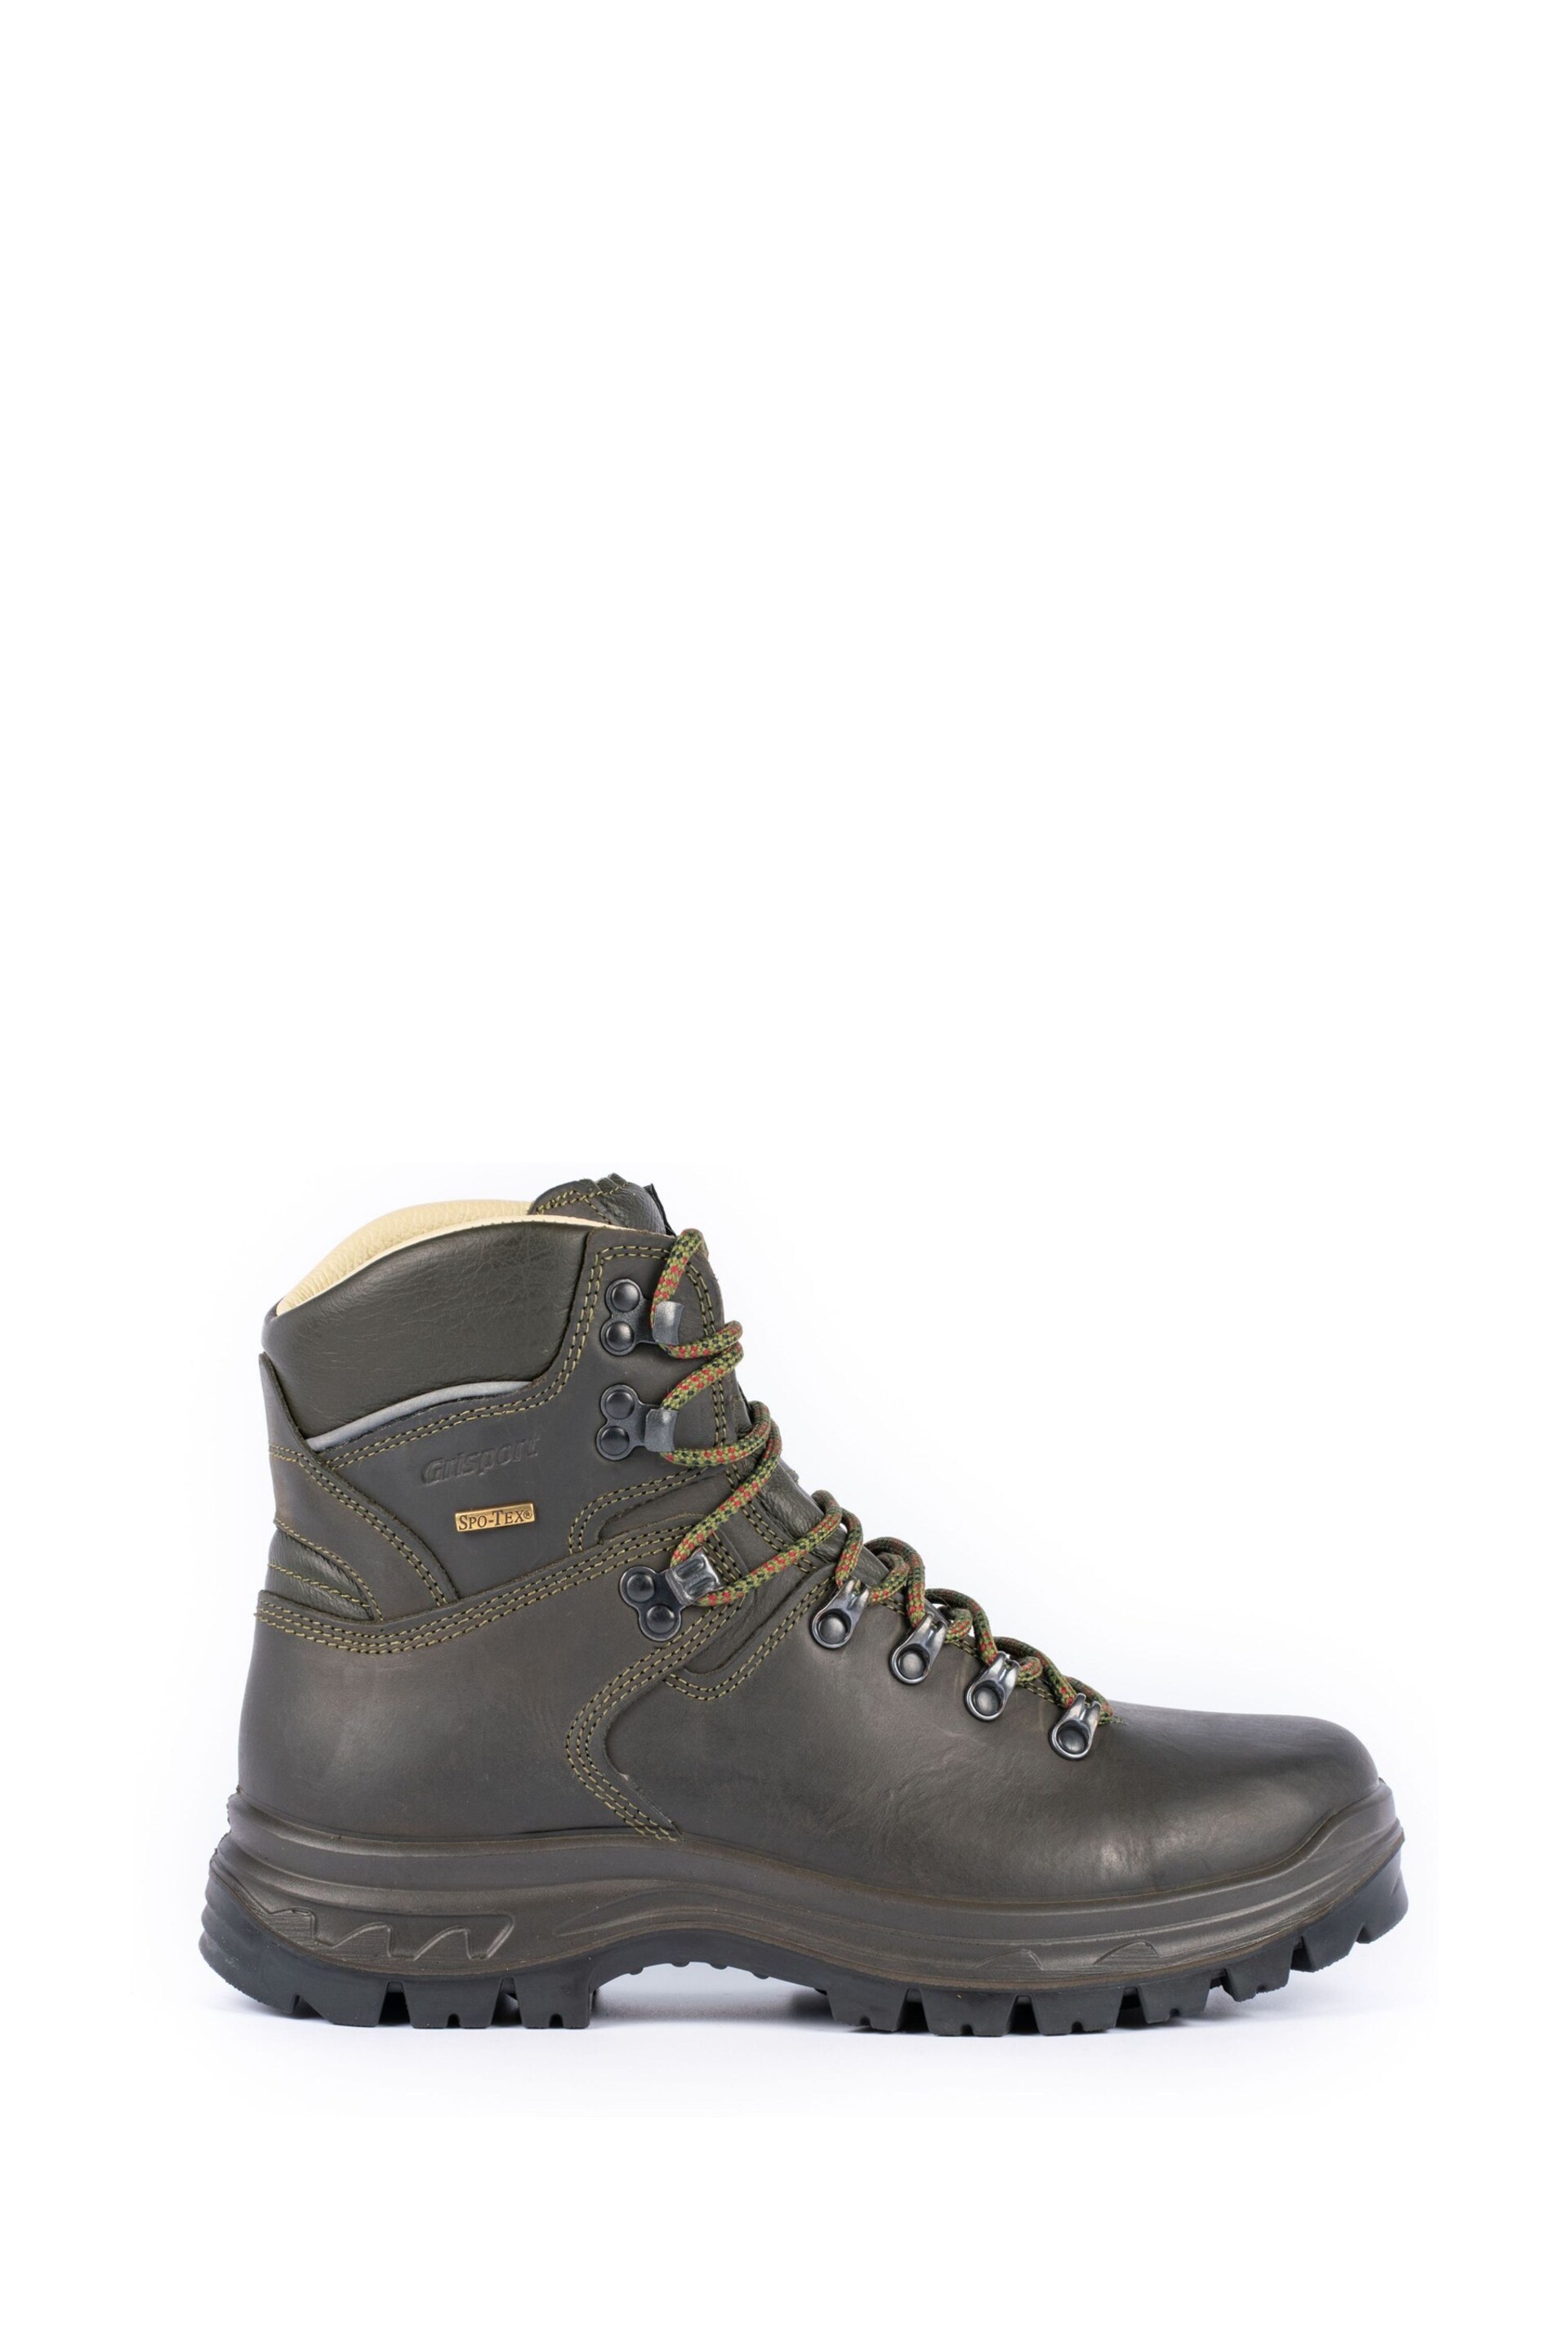 Grisport Rampage Green Waterproof and Breathable Hiking Boots - Image 1 of 7